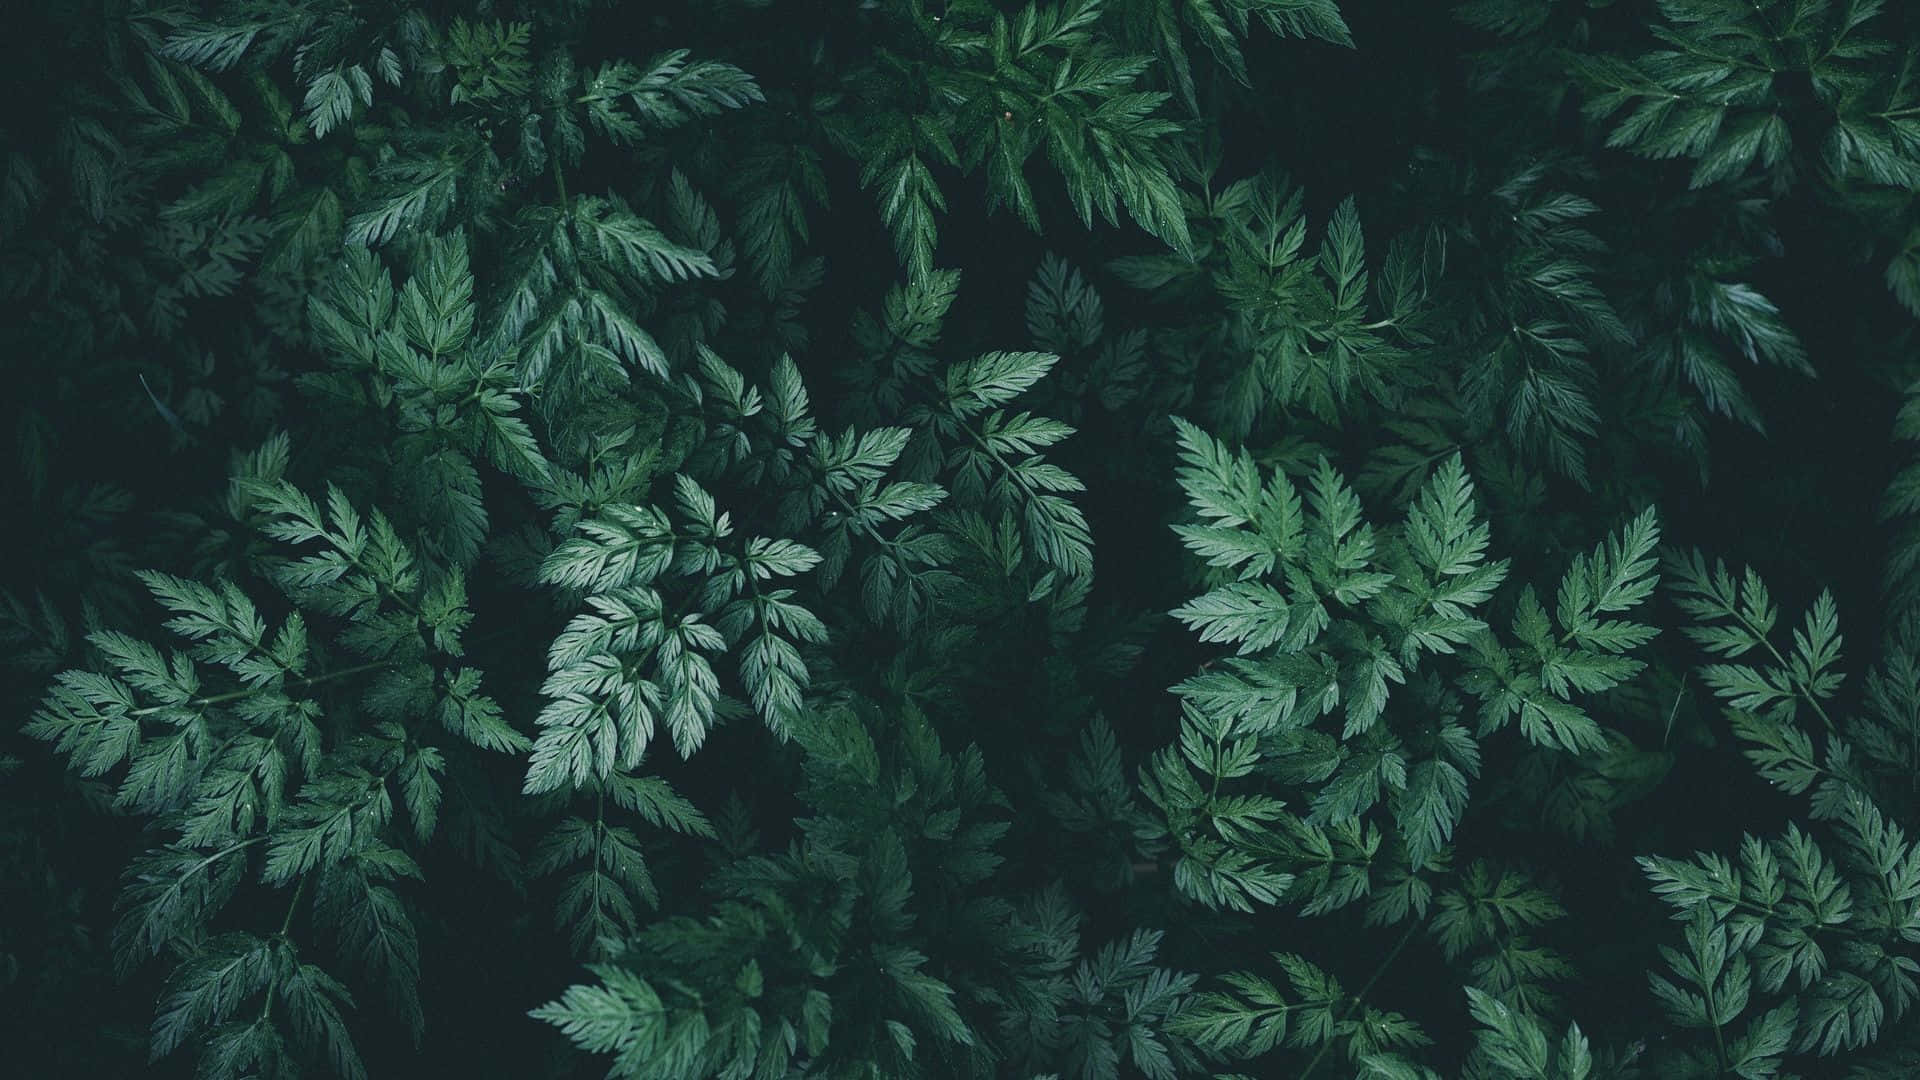 Download Dark Green Aesthetic Nature-Inspired Background | Wallpapers.com